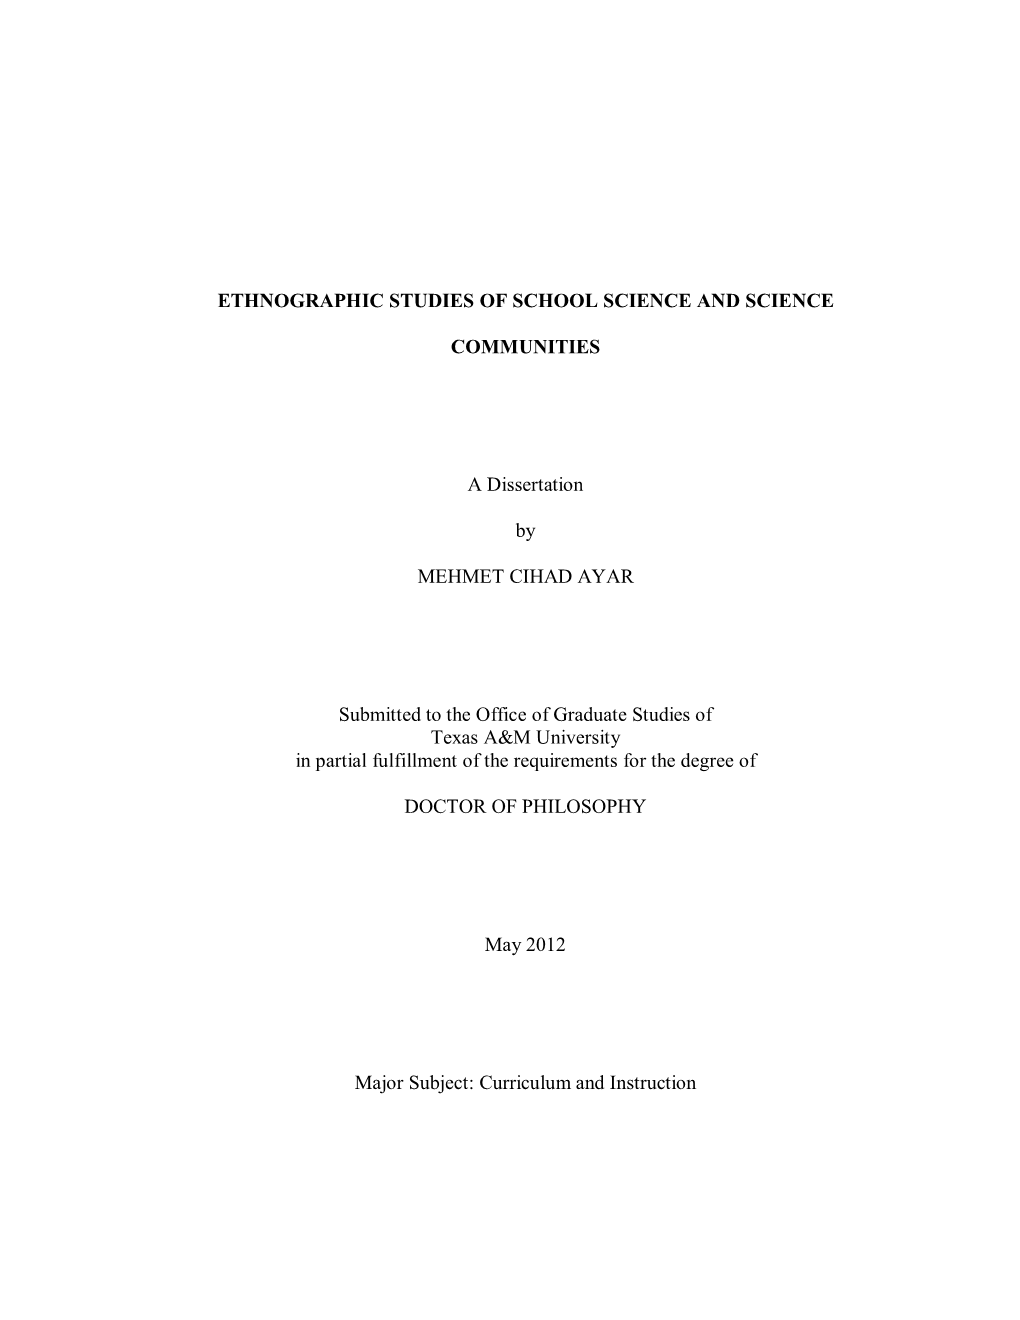 Ethnographic Studies of School Science and Science